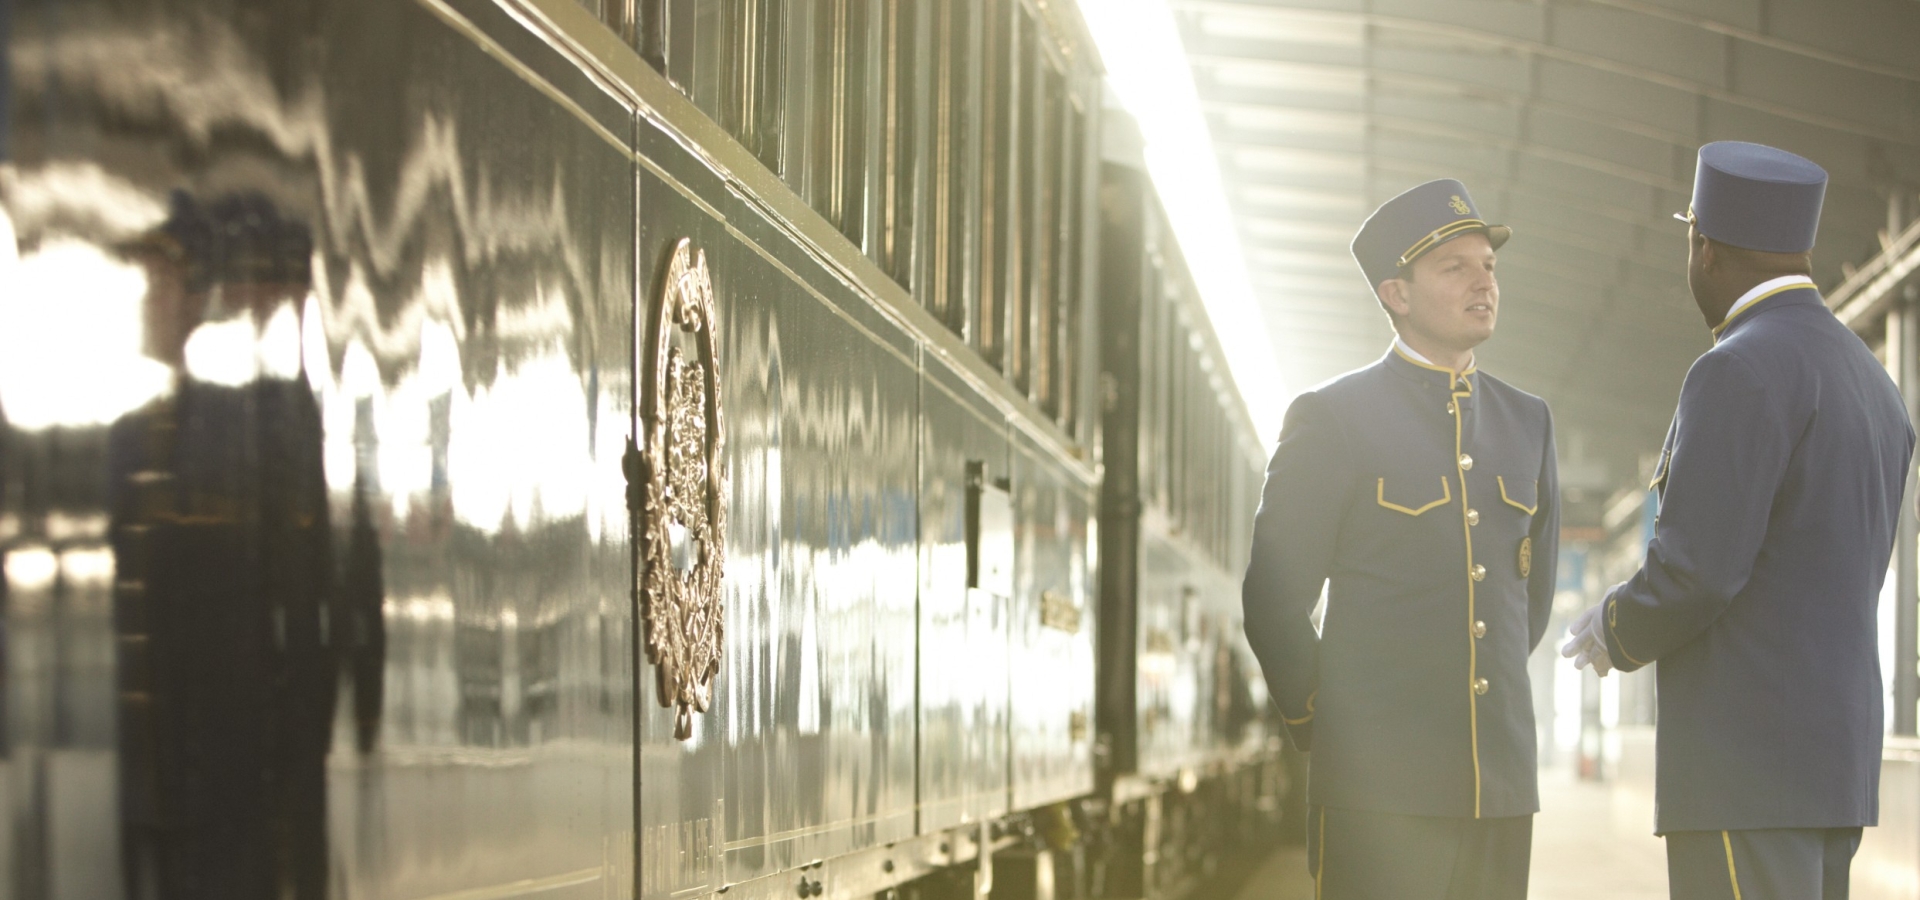 Venice Simplon-Orient Express - The World's Most Iconic Train